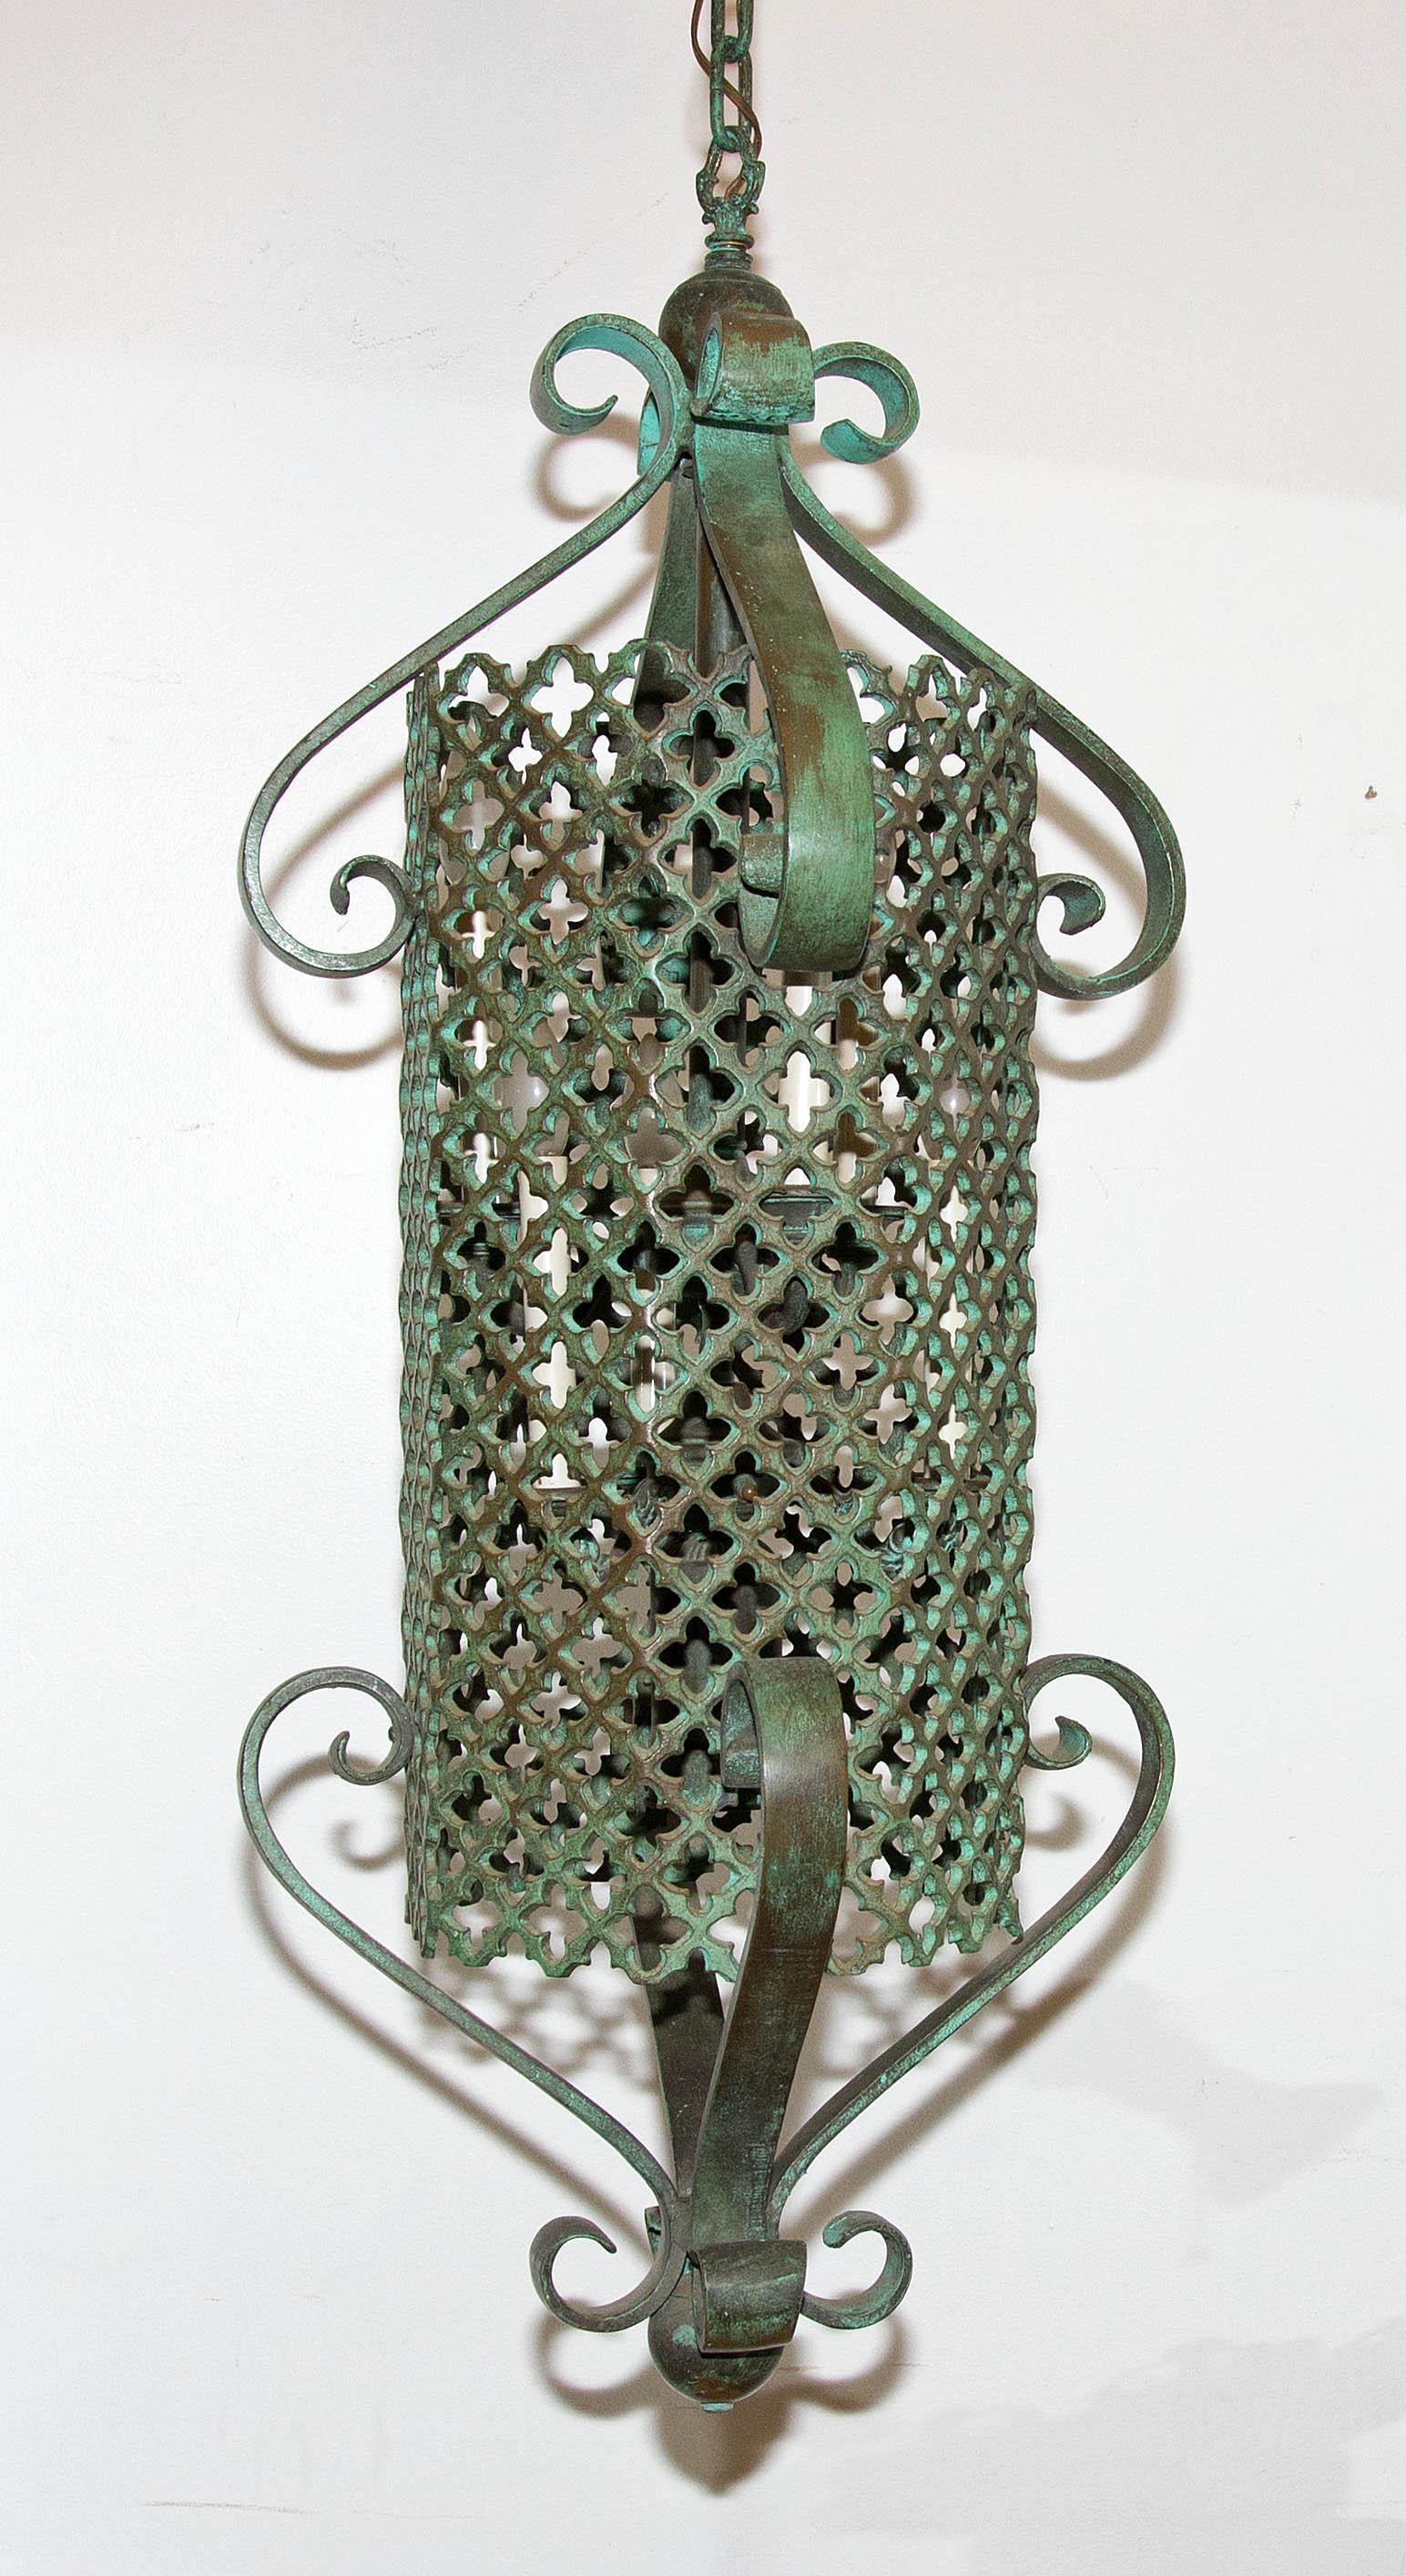 High quality bronze pendant light. Verdigris patina. Interior with six candle lights and one down light. Six feet of matching bronze chain, early 20th century.